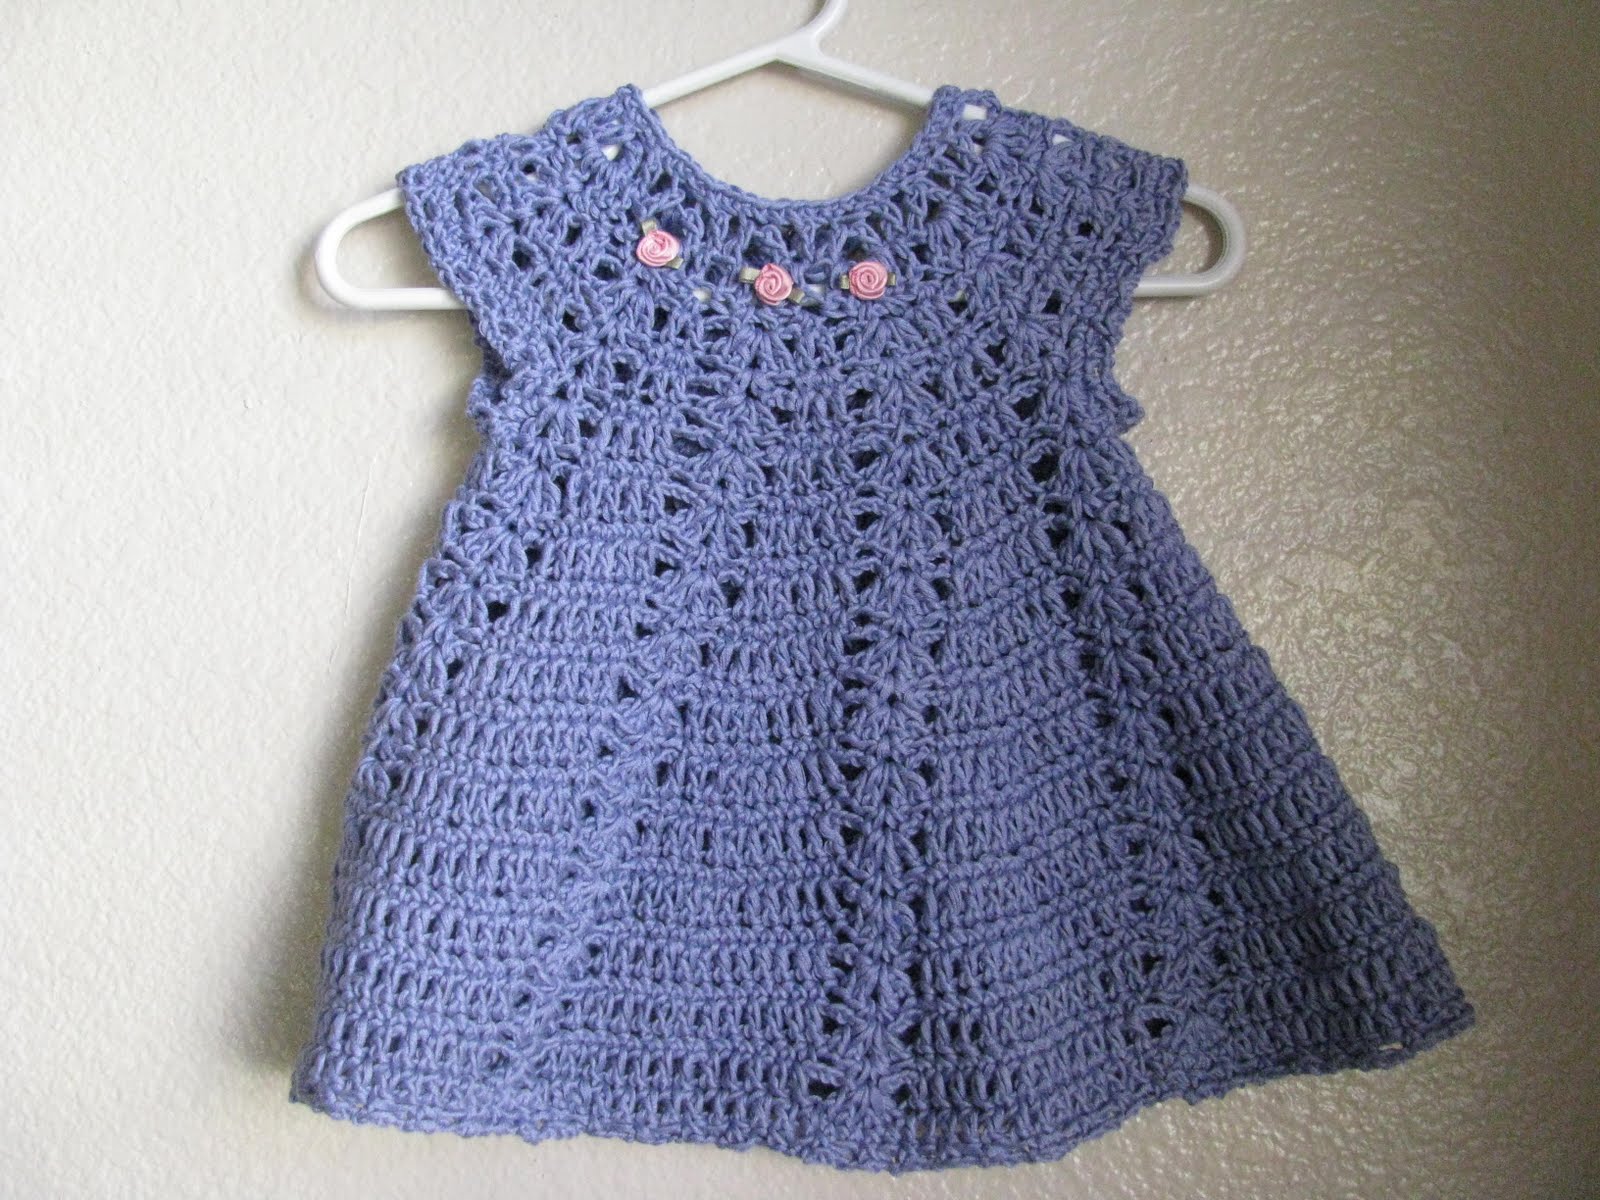 My latest project: My first crocheted baby dress finished!